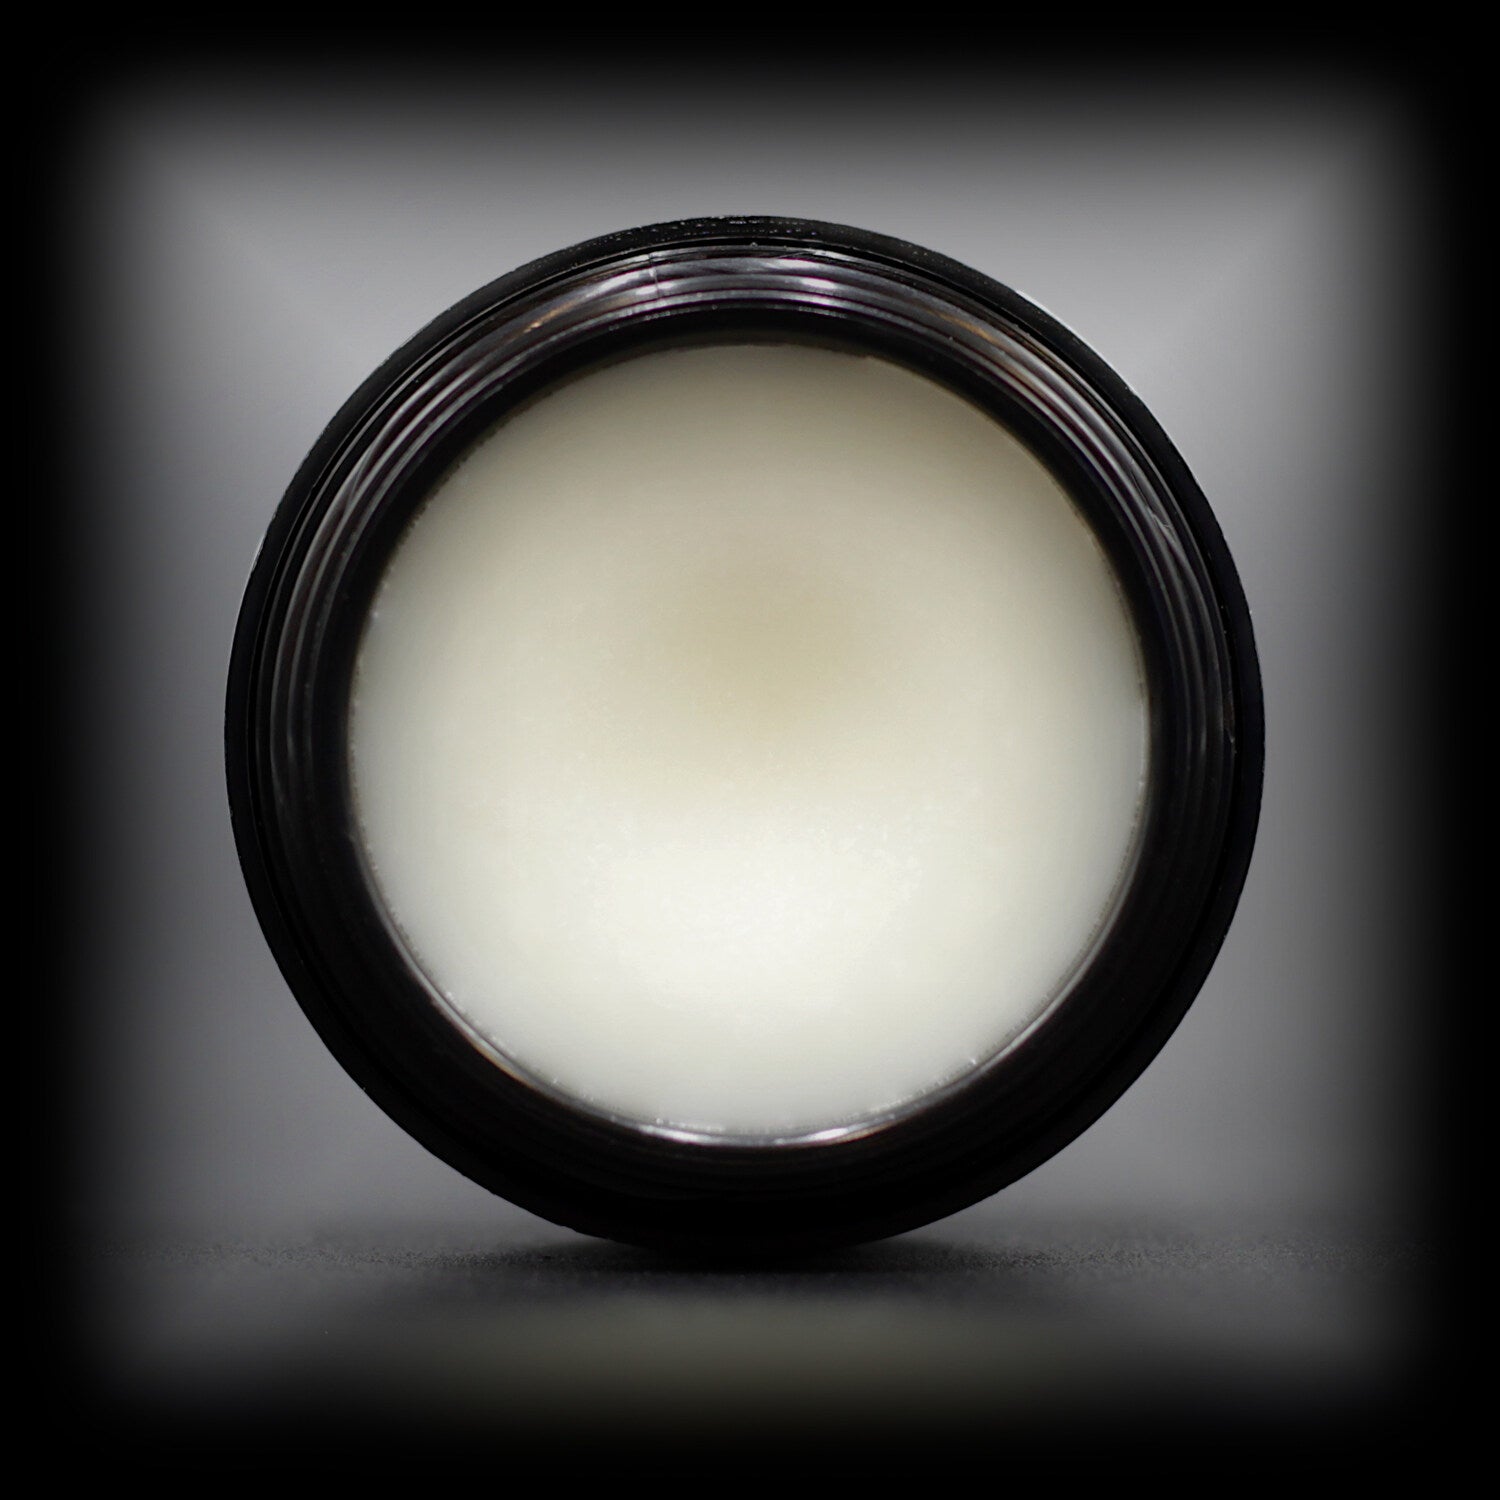 Naturally Wicked Maple Syrup Lip Balm Exposed Inner As White, Creamy, Nutritious Lip Conditioning Balm